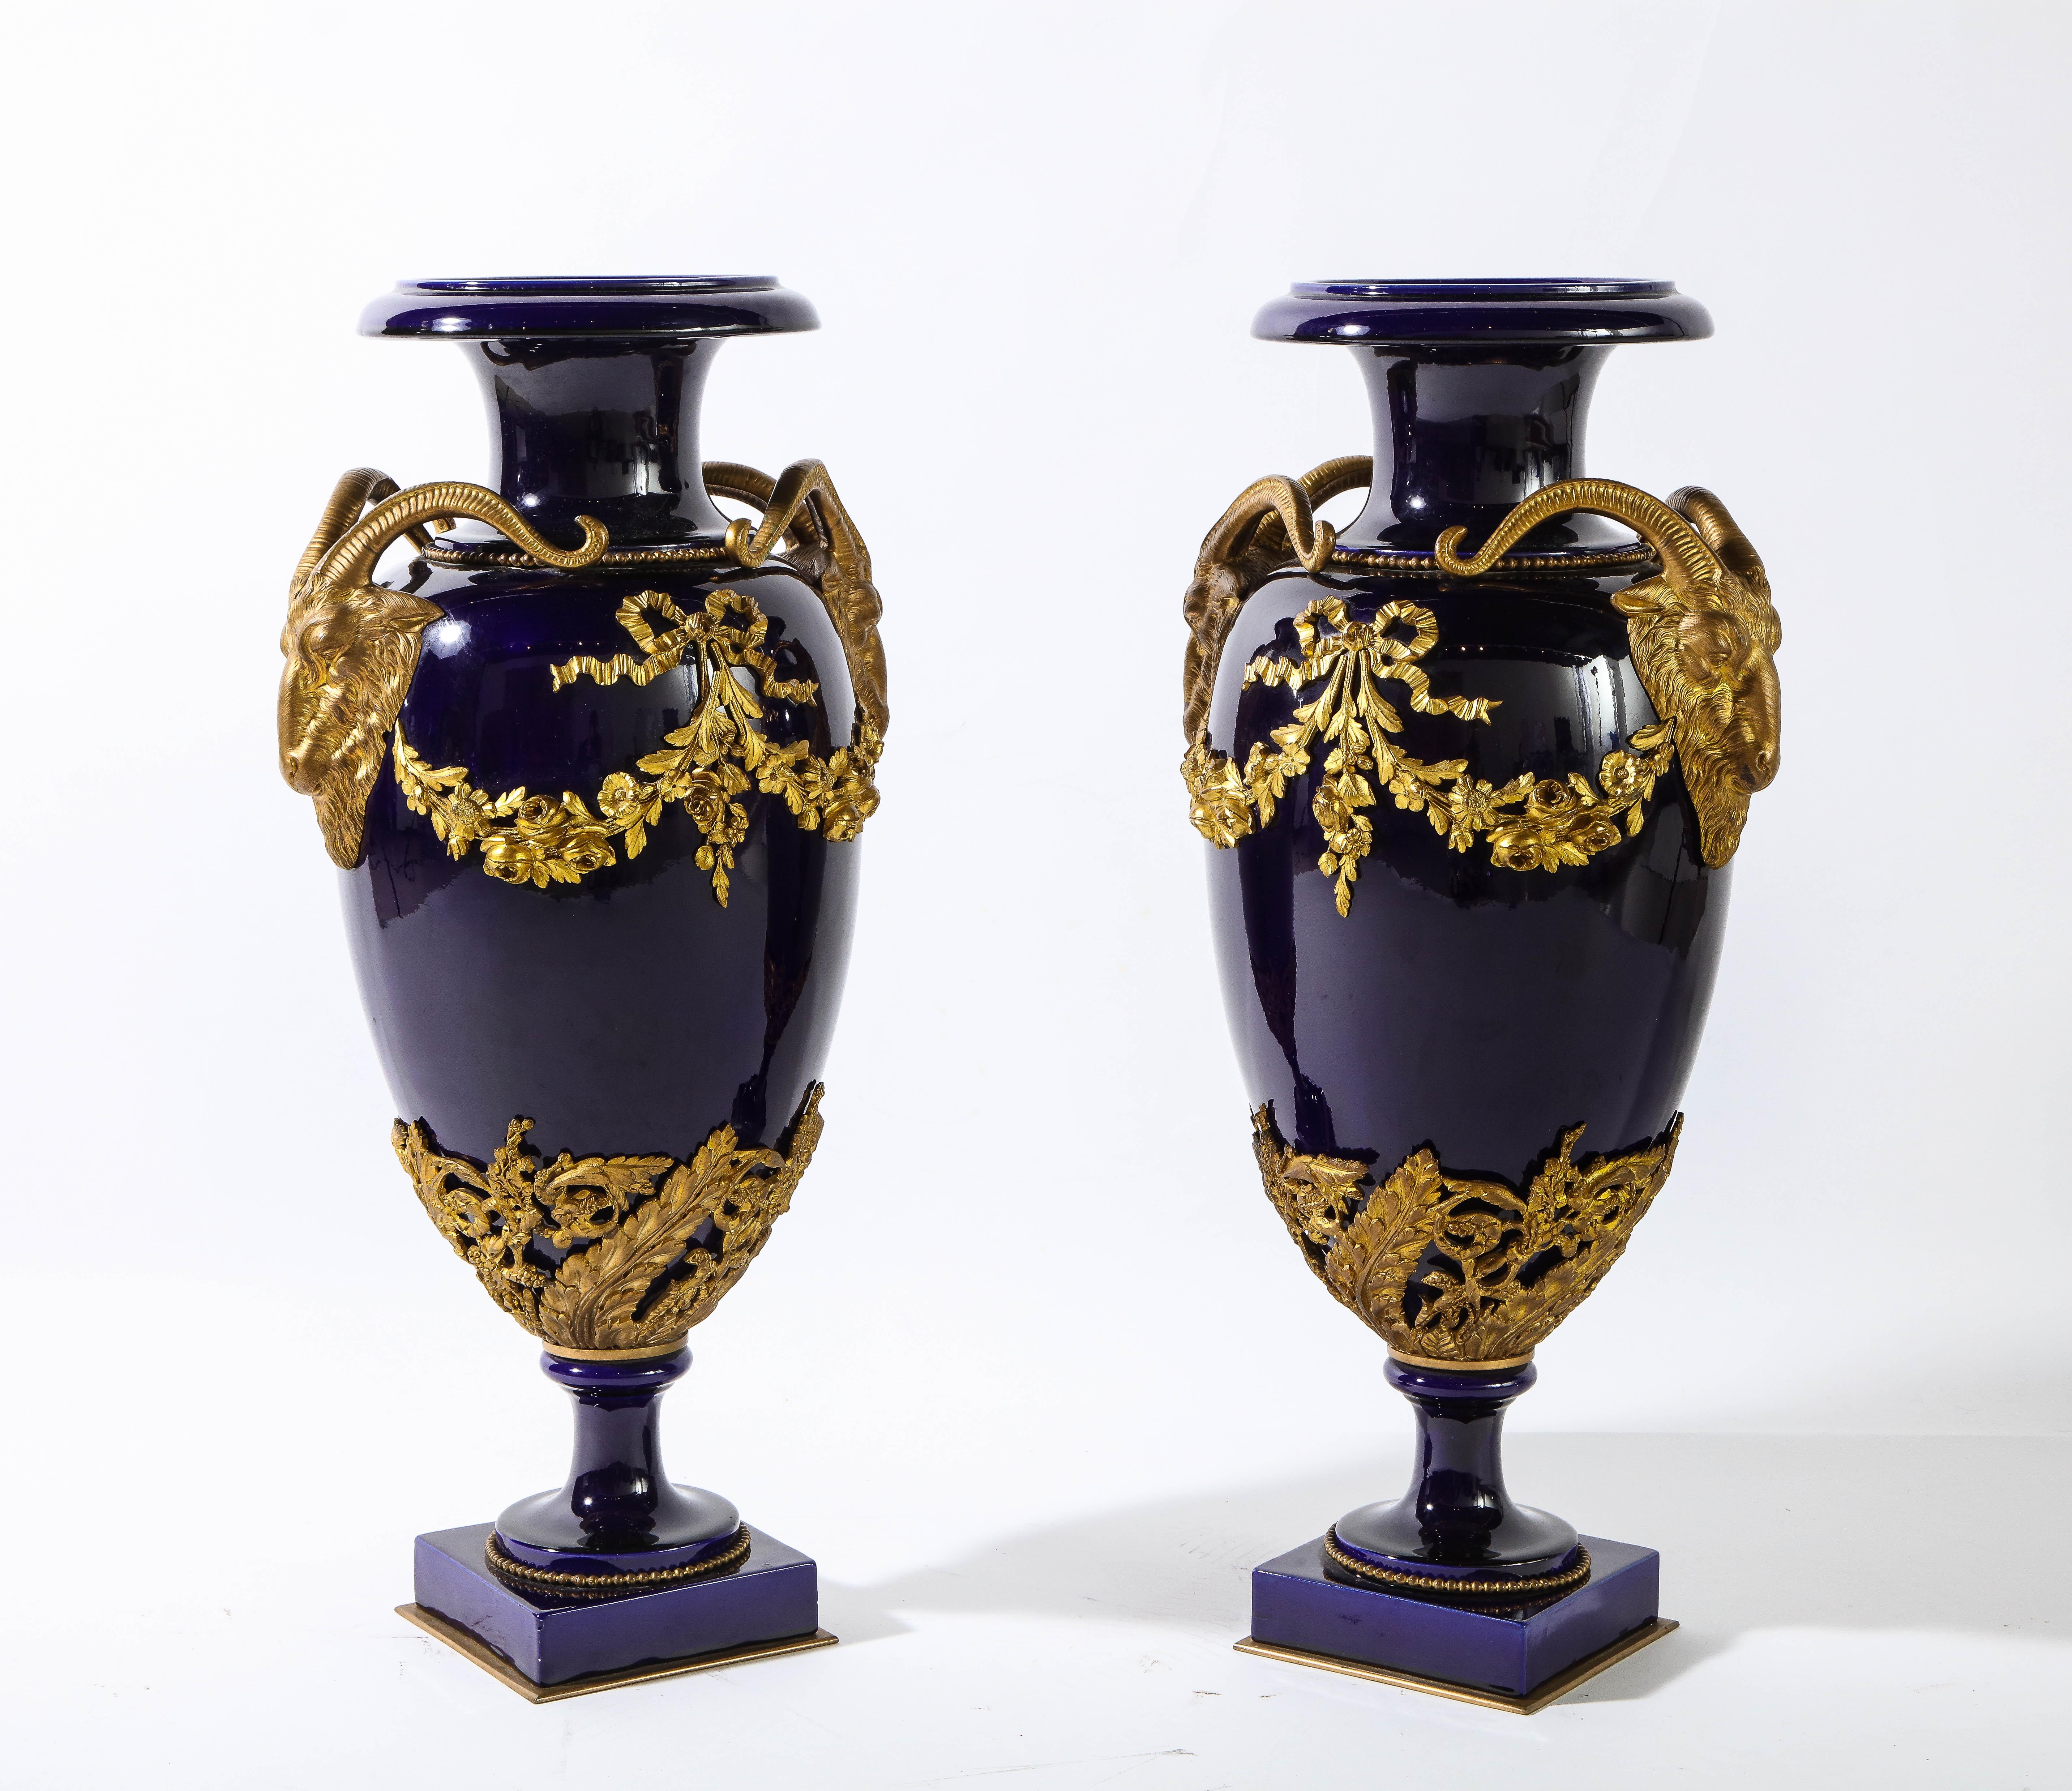 A fine pair of large antique French Louis XVI Sevres style cobalt blue porcelain and dore bronze mounted vases with wreaths, flowers, and ribbons, flanked on either end with a pair of rams head handles. This fabulous pair of porcelain vases have